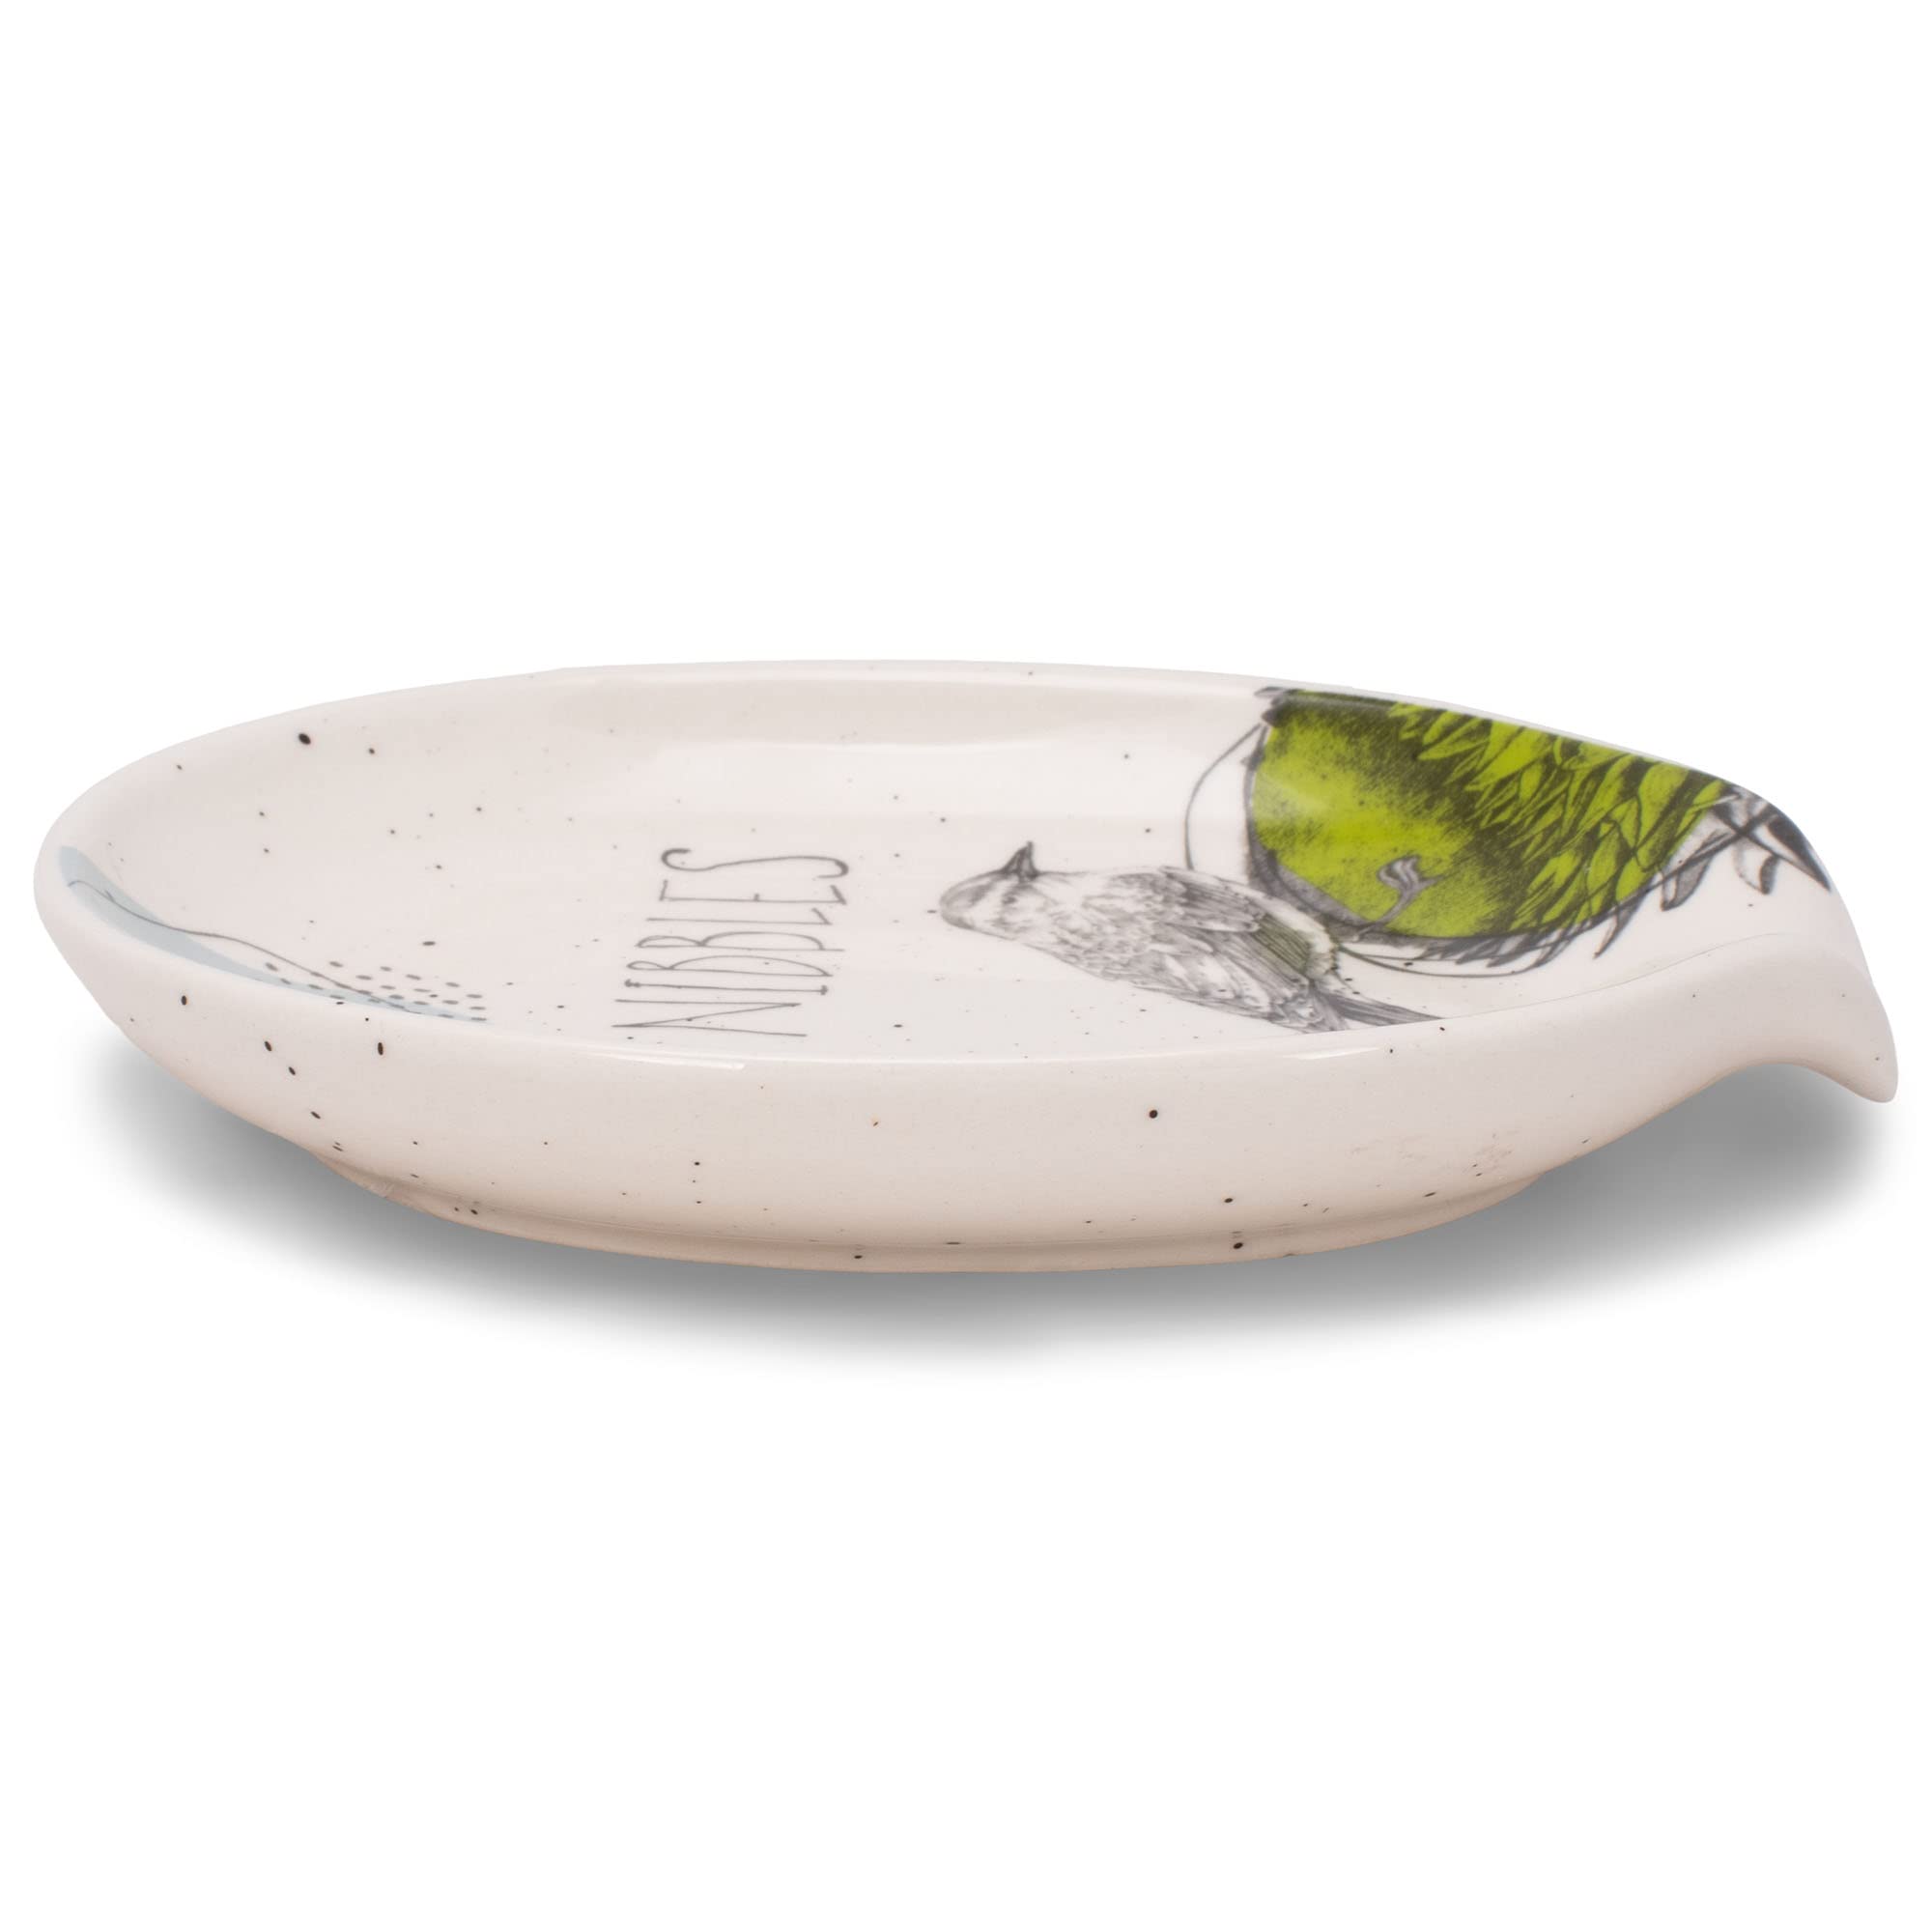 DEMDACO Nibbles Bird Glossy Floral White 6 x 5 Stoneware Ceramic Oval Spoon Rest